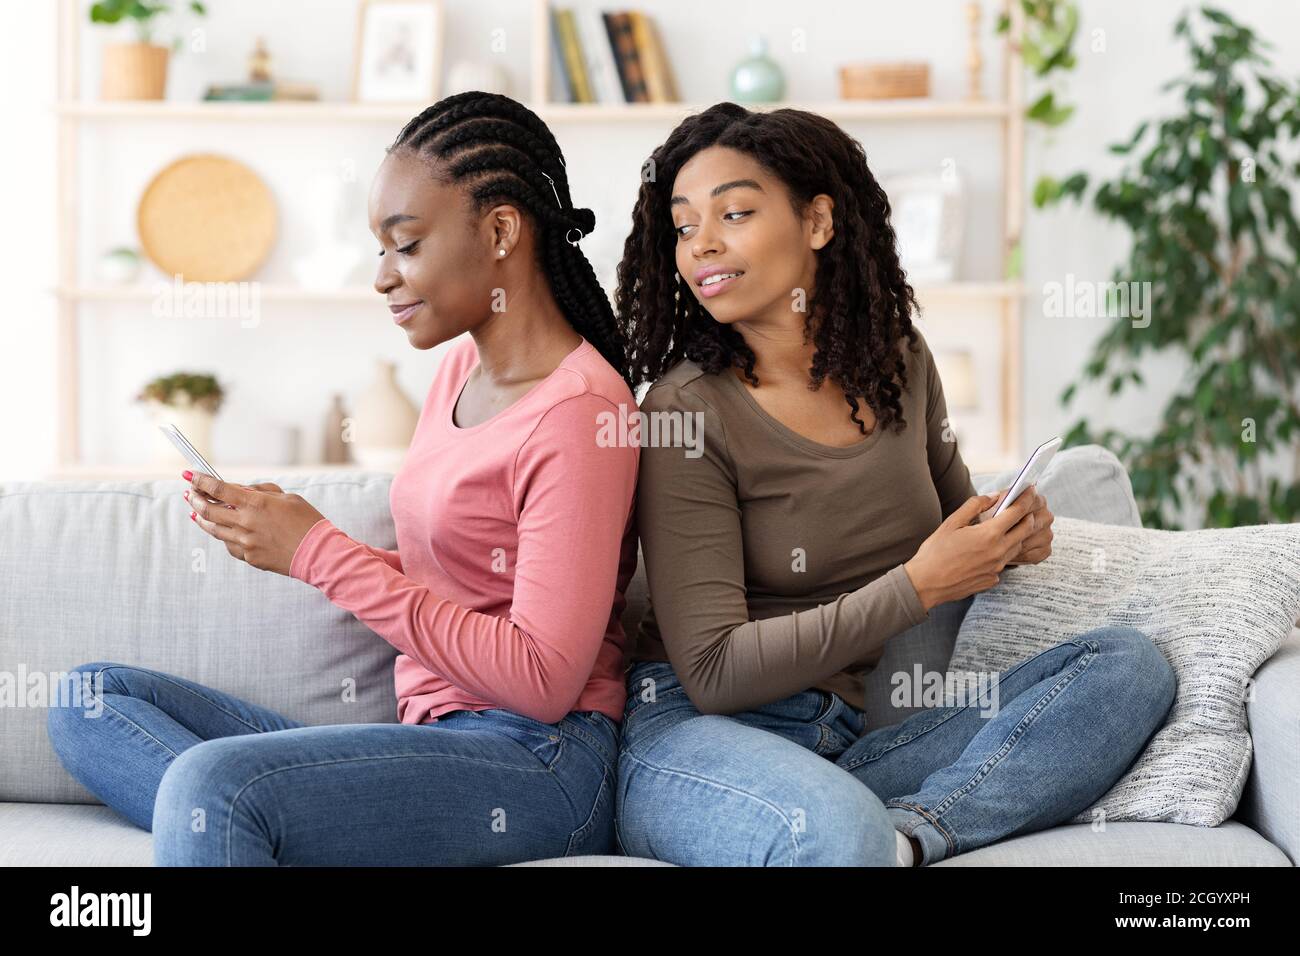 Young black women sitting back to back, using smartphones Stock Photo